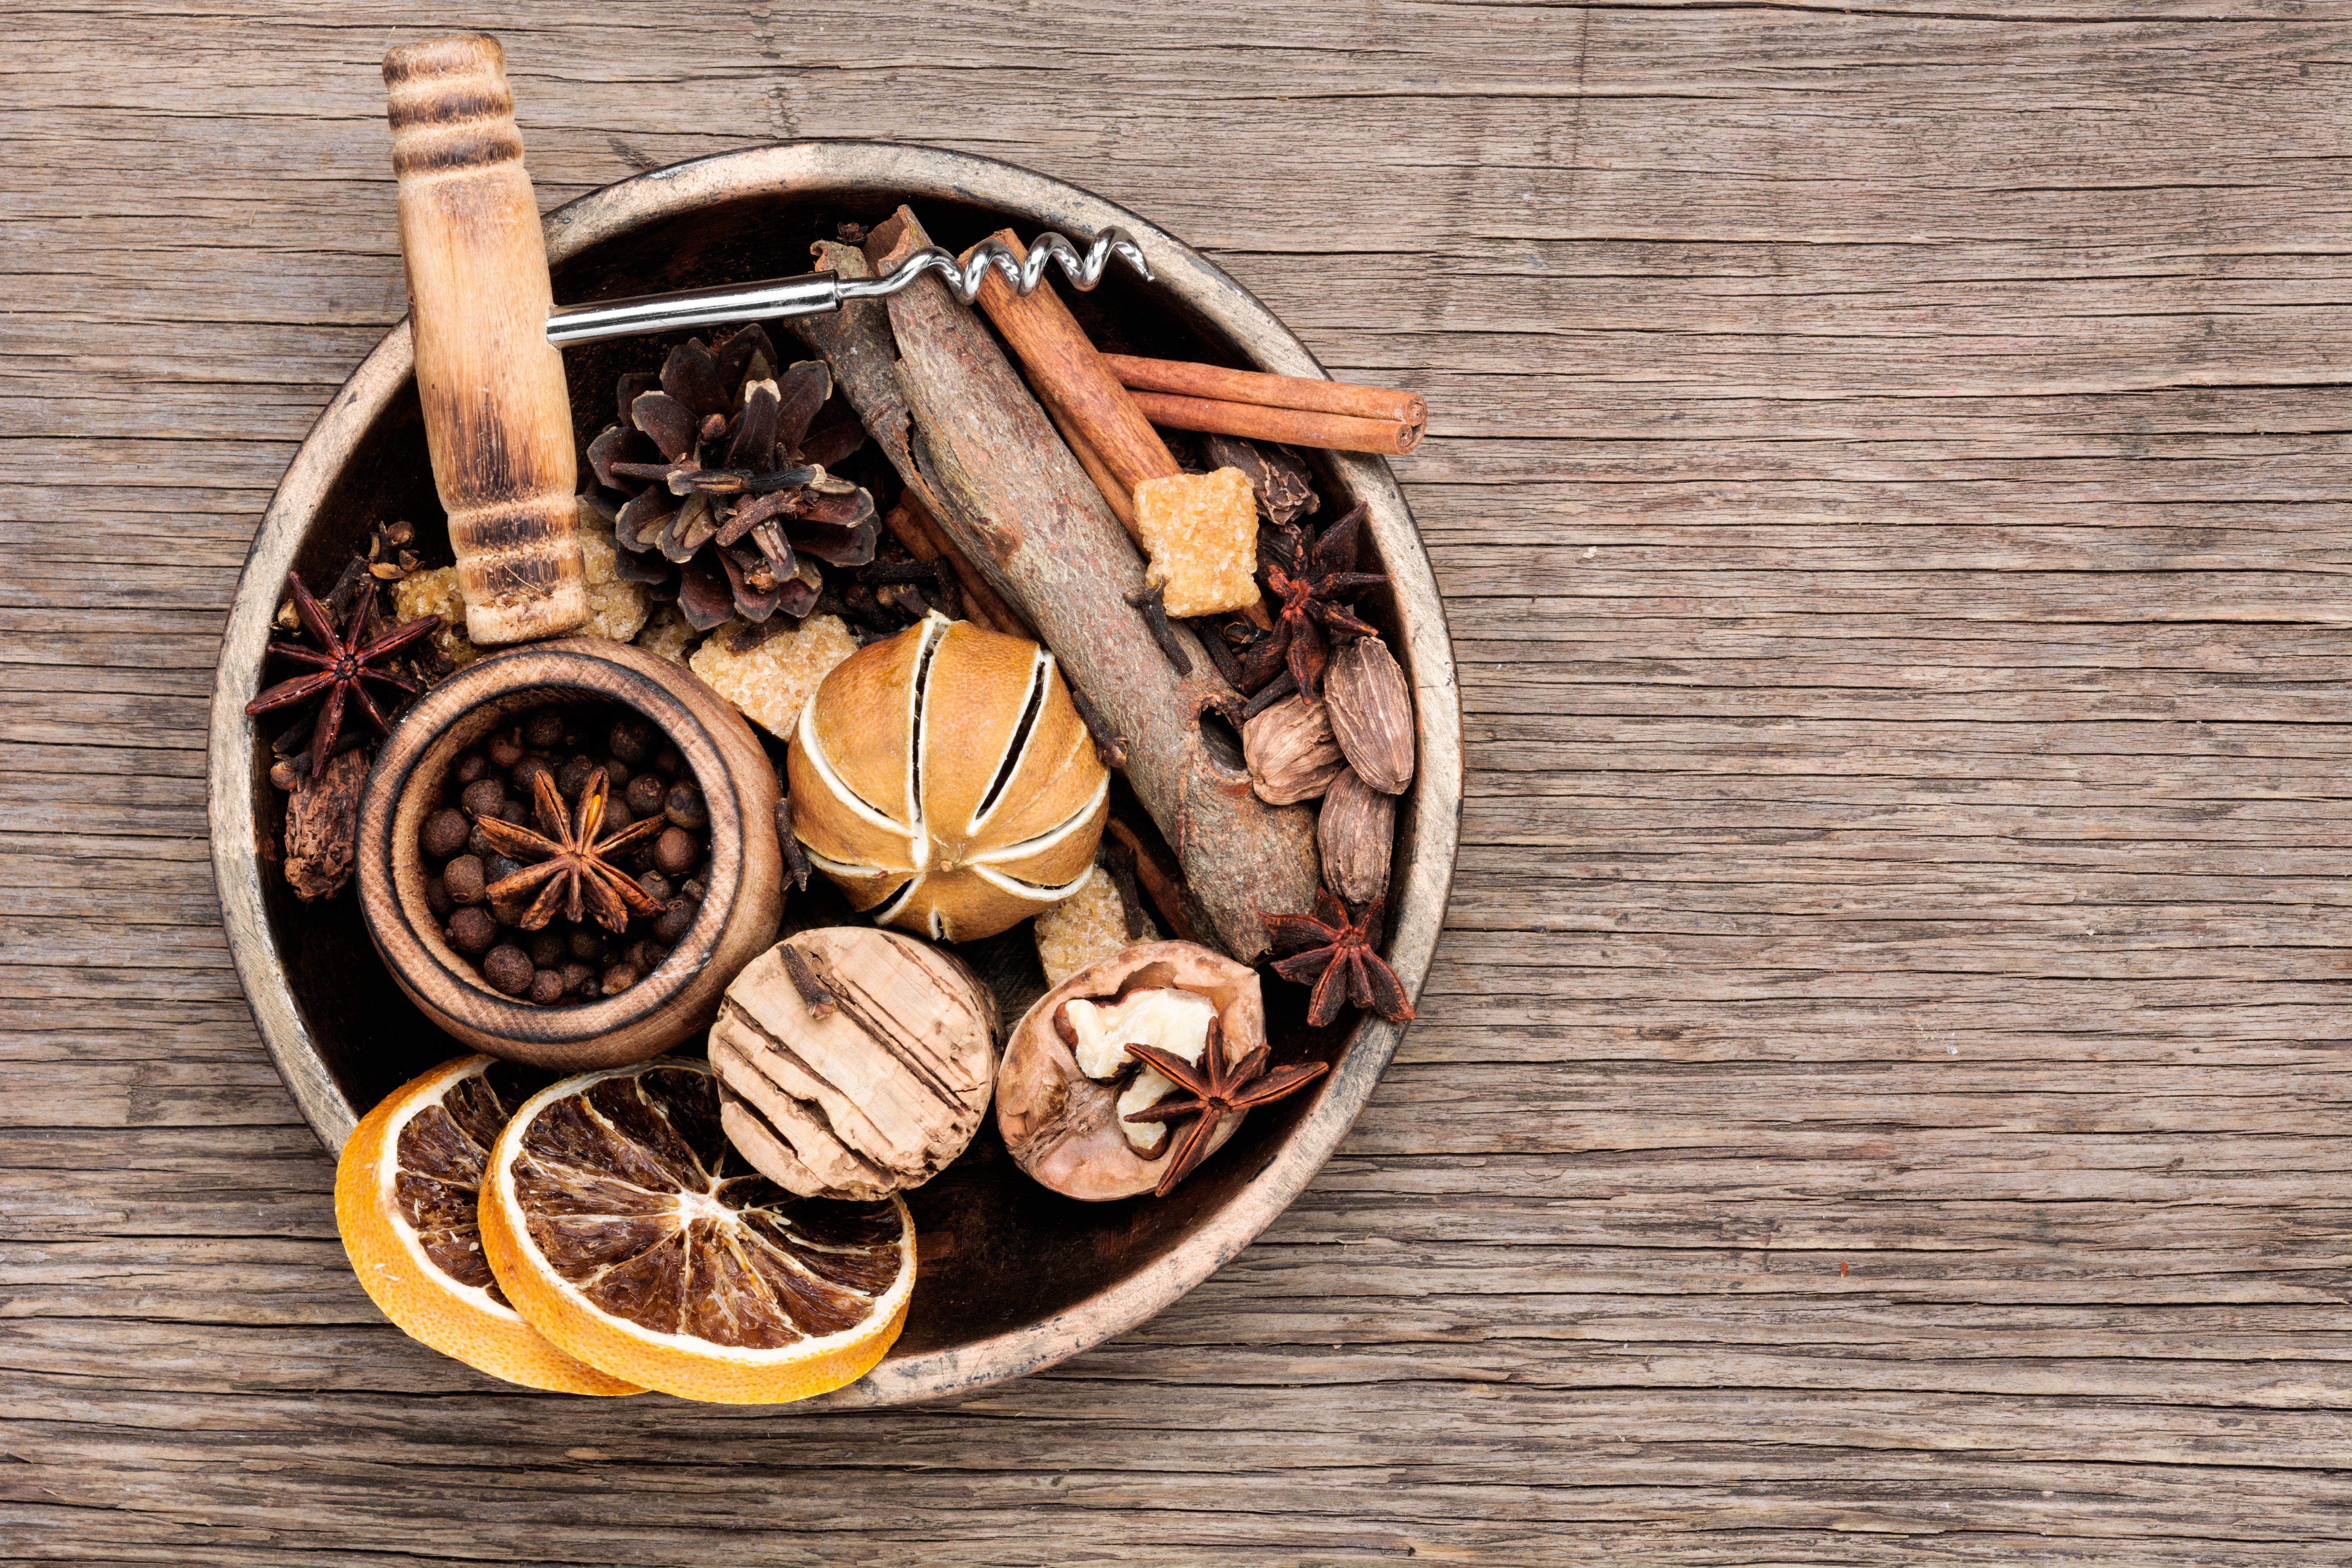 Mulled wine ingredients to celebrate National Mulled Wine Day